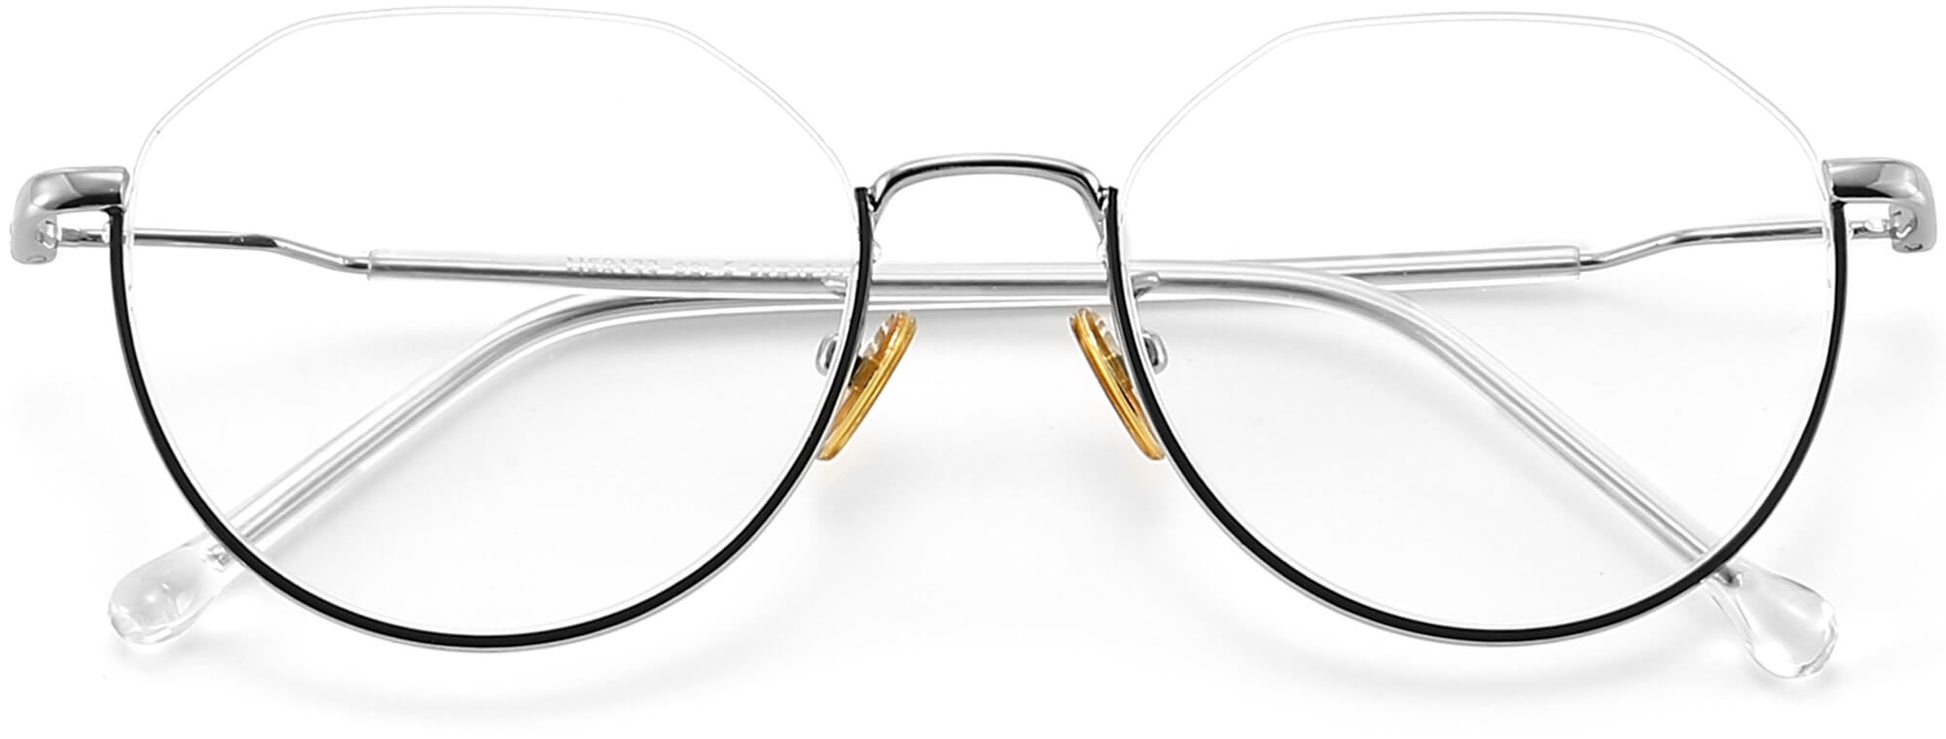 Russell Geometric Black Eyeglasses from ANRRI, closed view